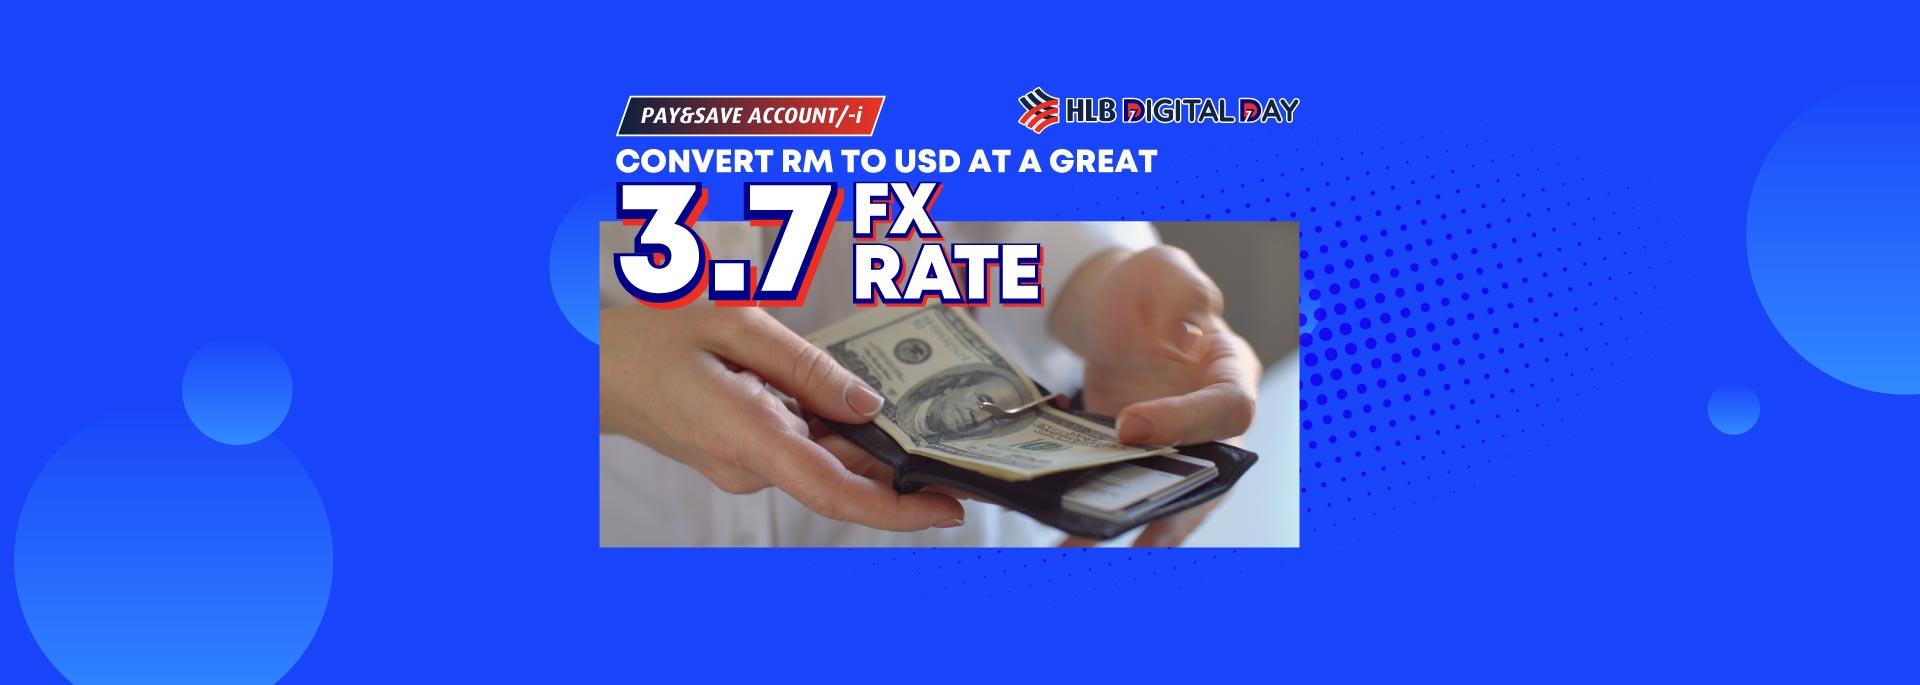 ONLY on 7.7 Convert RM2,000 into USD and enjoy 3.7 special FX rate